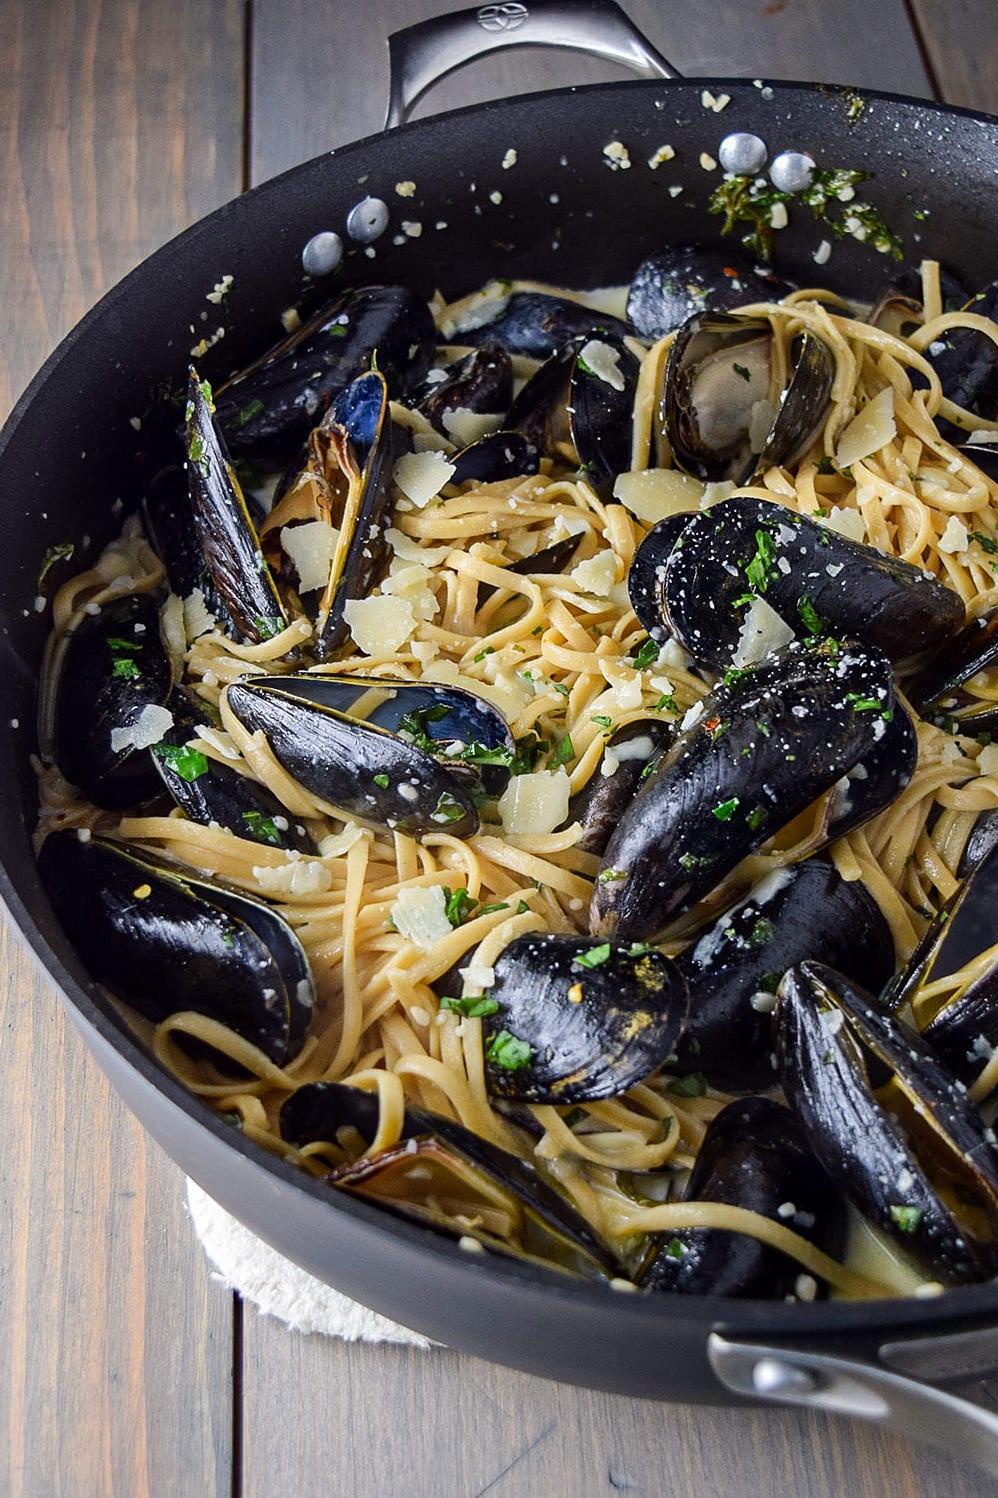  Save your next trip to the beach by cooking up this spaghetti with white wine and mussel sauce instead.